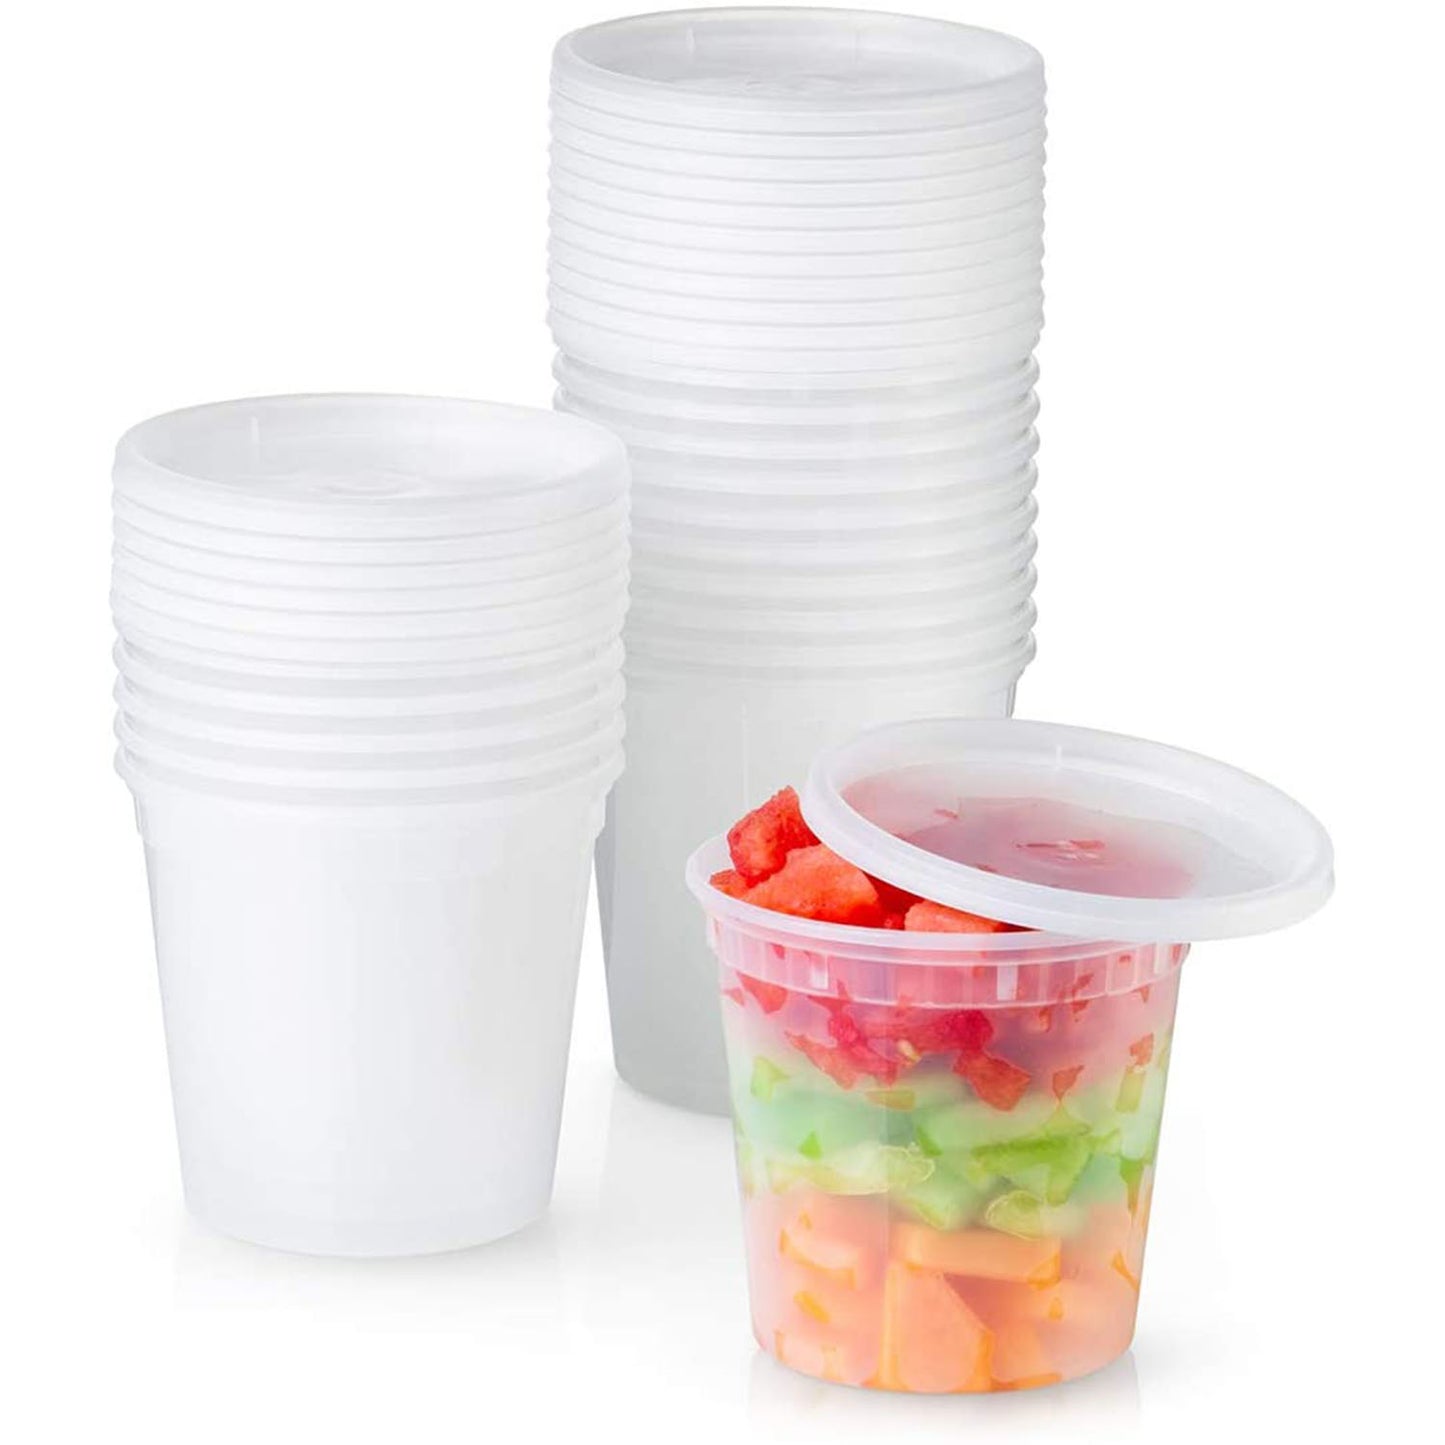 Glad Round Plastic Containers with Lids - 7 Pack, 24 oz - Harris